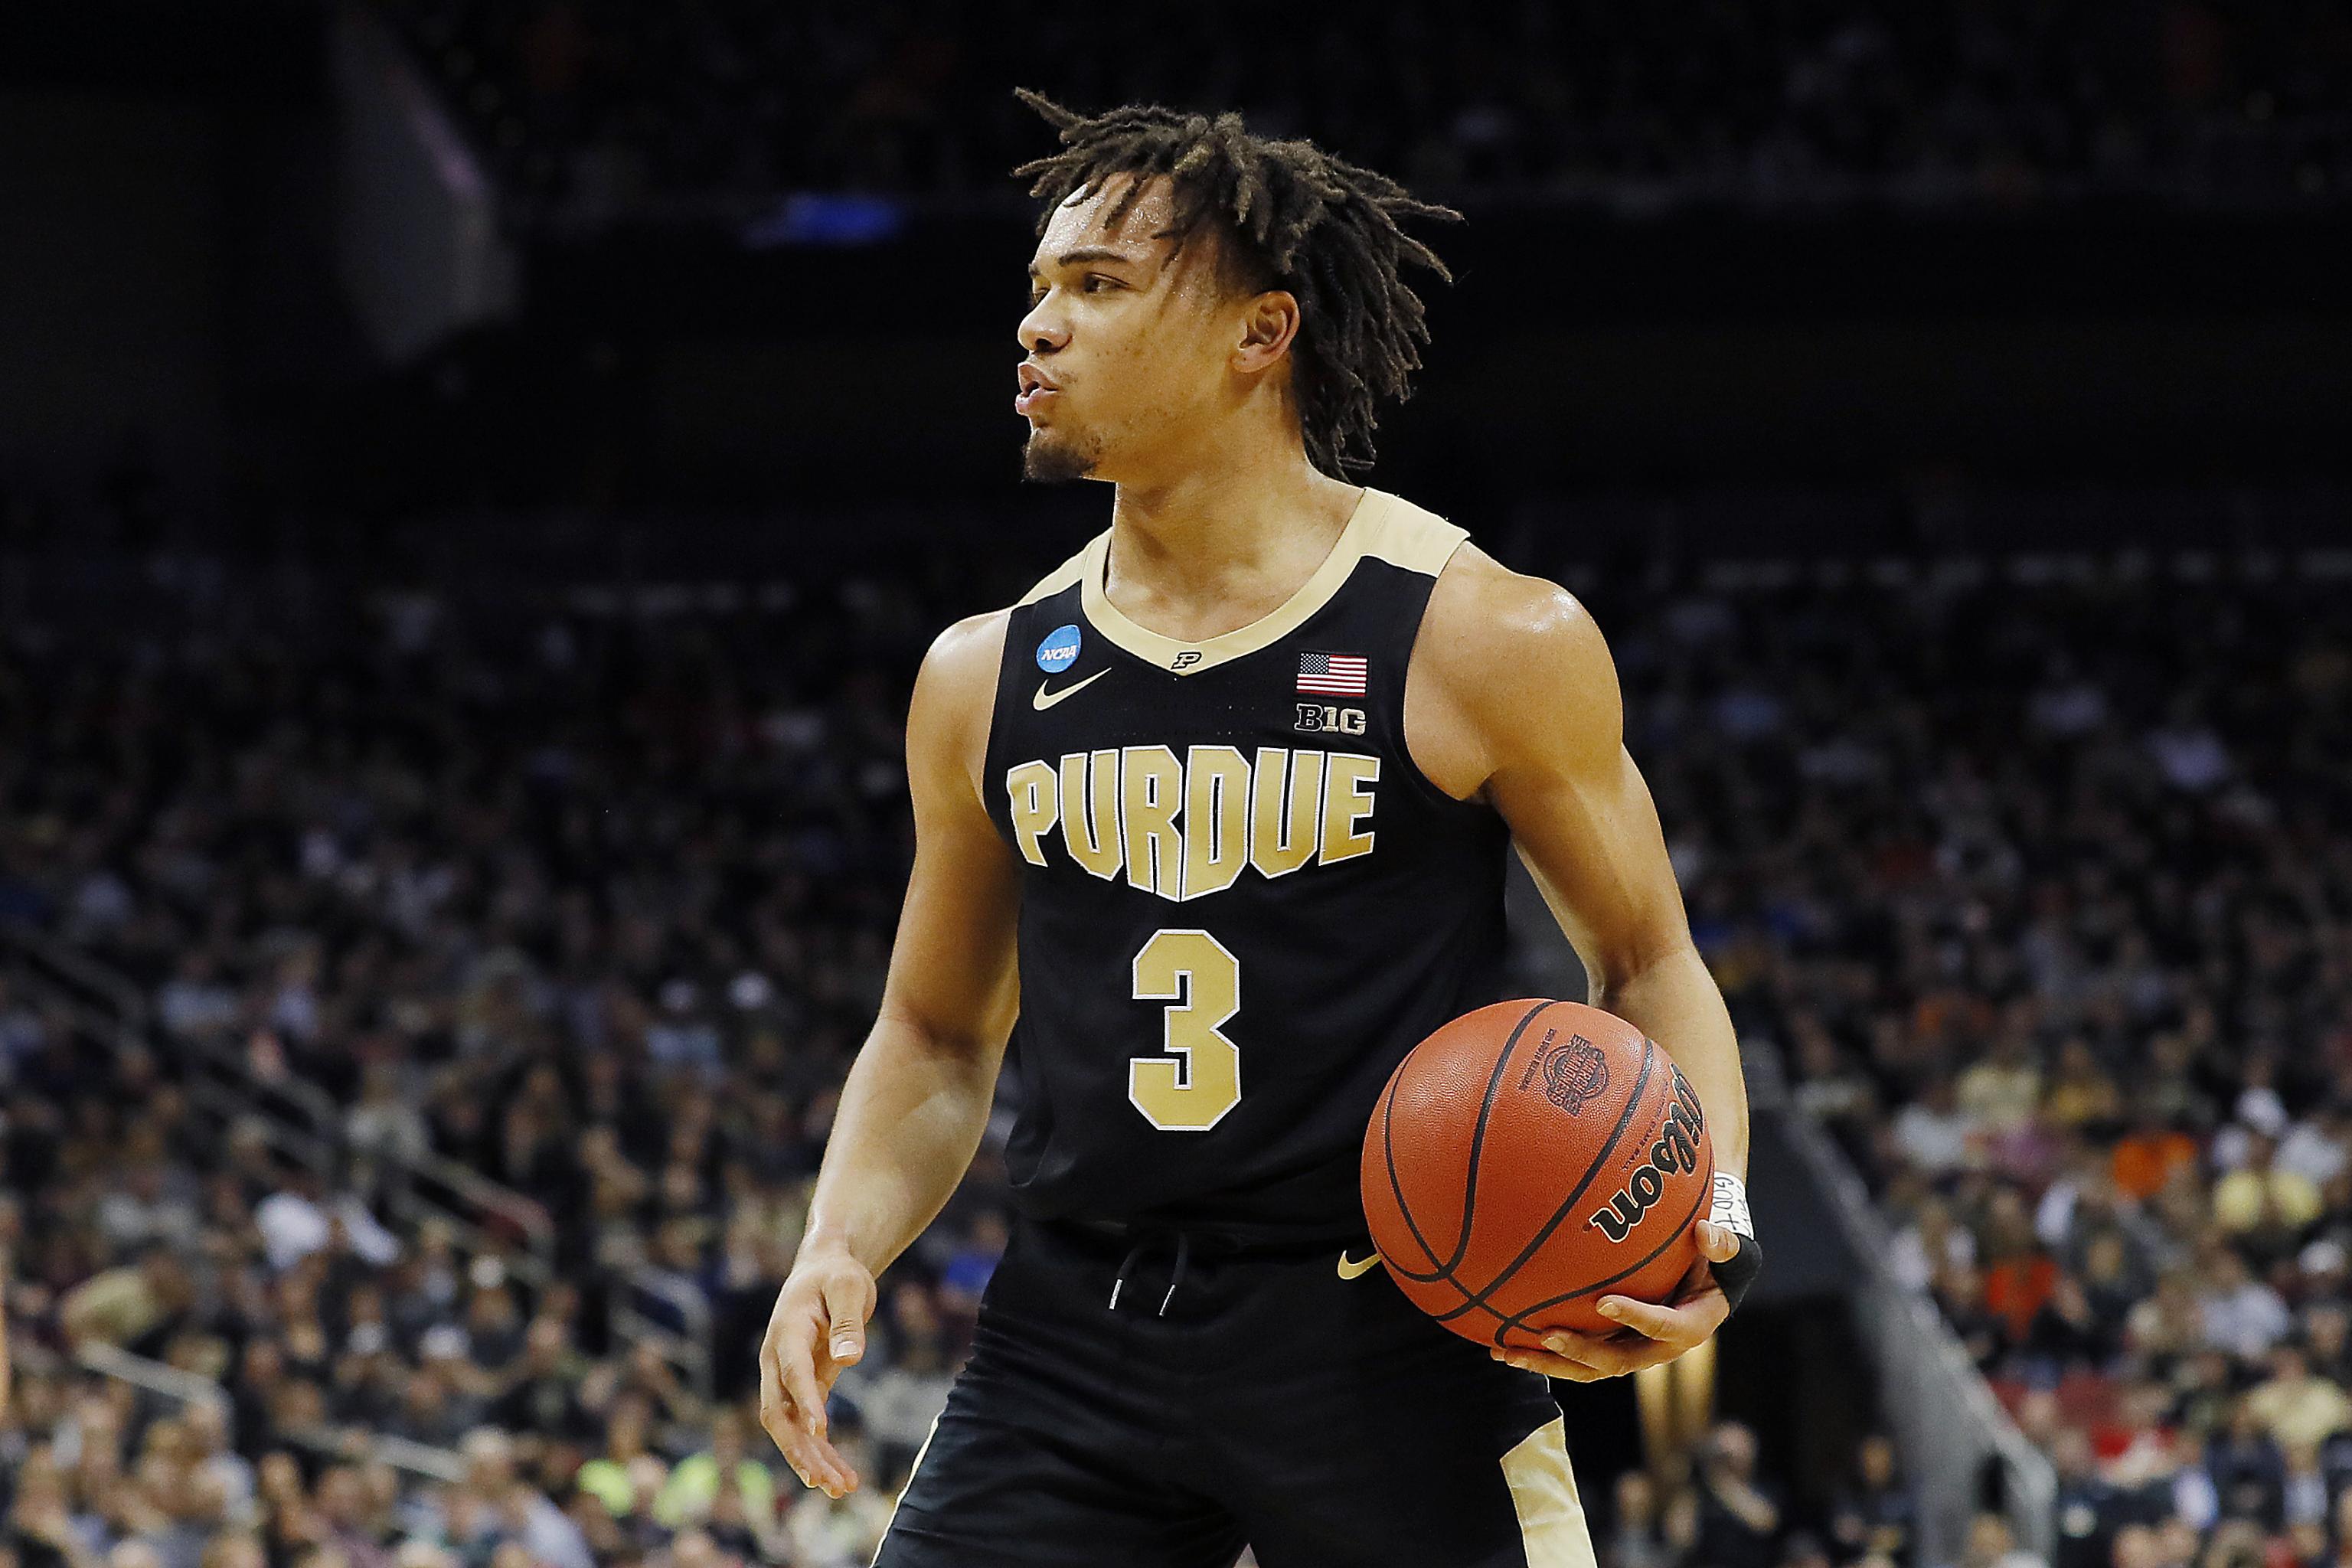 Tennessee Vols Basketball: Purdue's Carsen Edwards will decide matchup -  Rocky Top Talk